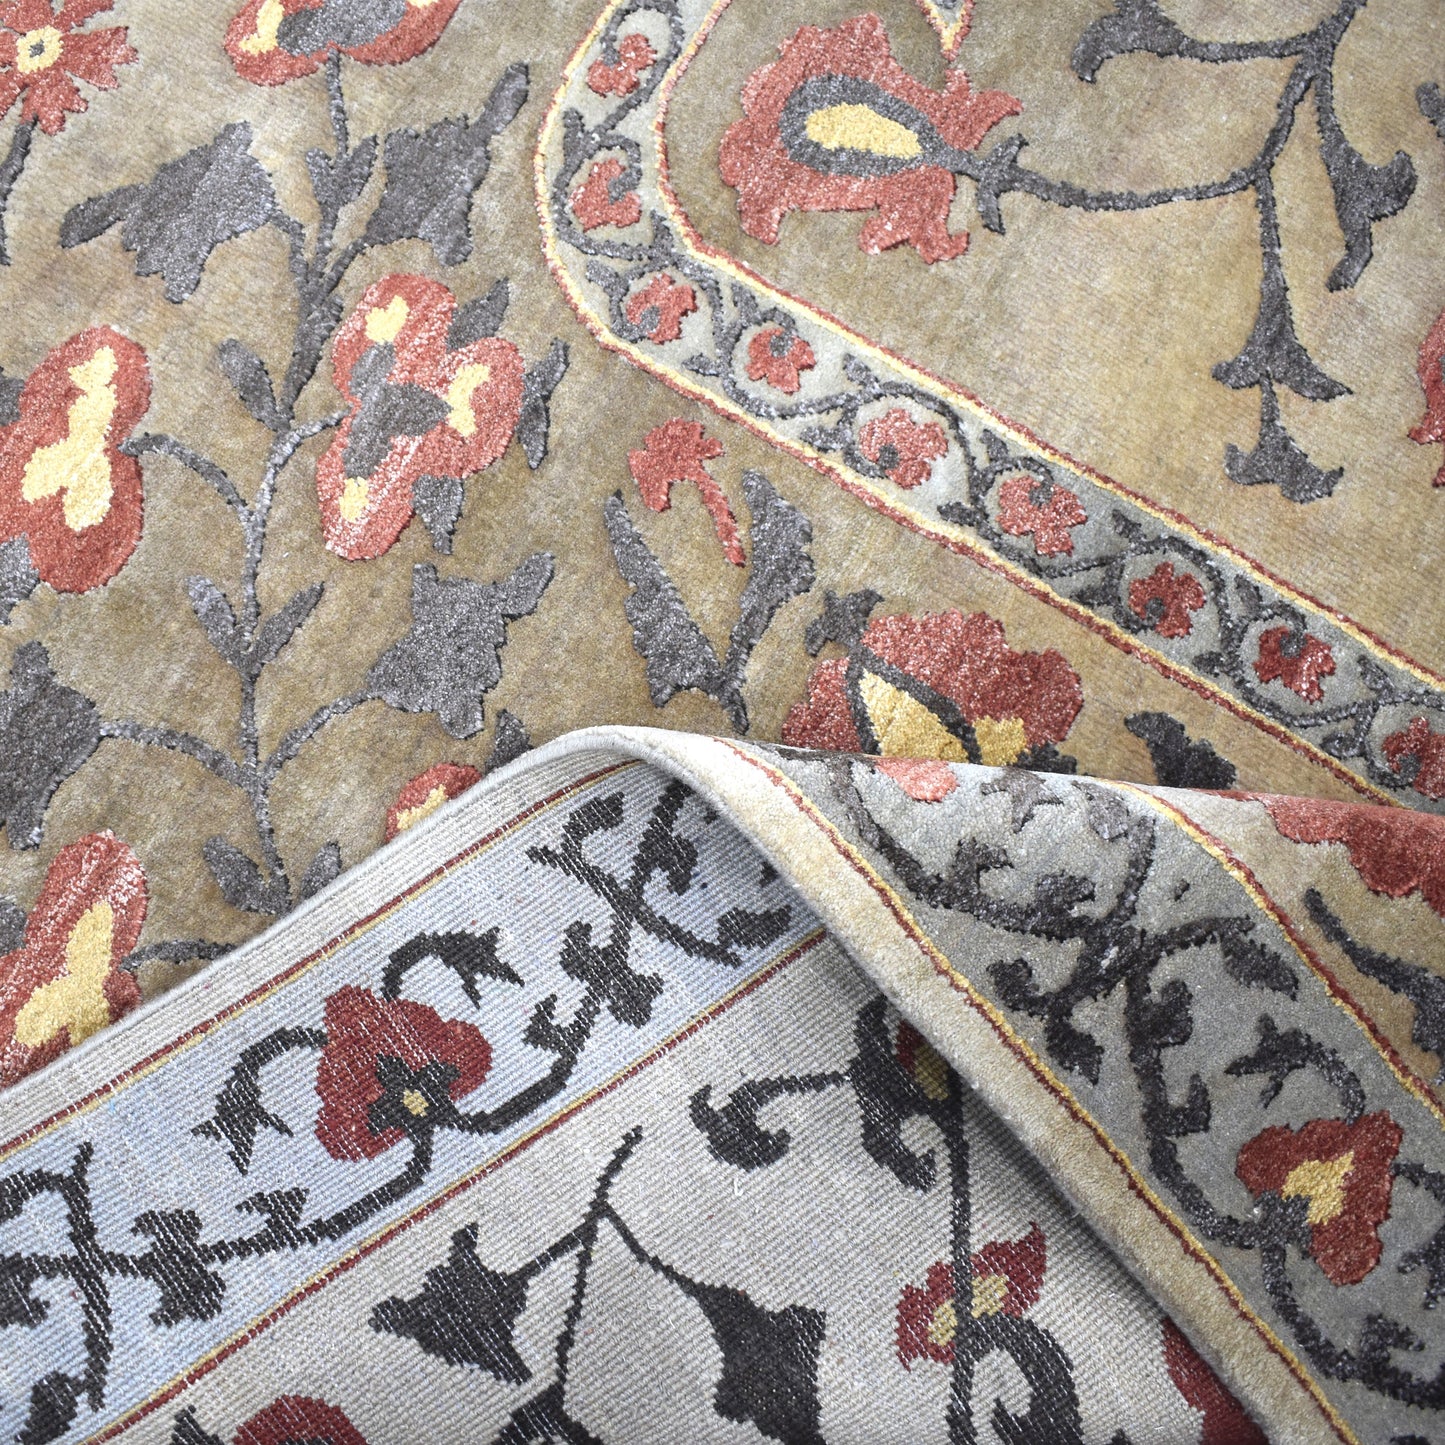 Get trendy with Uzbek Suzani Camel and Red Traditional Silk and Wool Handknotted Area Rug - Traditional Rugs available at Jaipur Oriental Rugs. Grab yours for $5940.00 today!